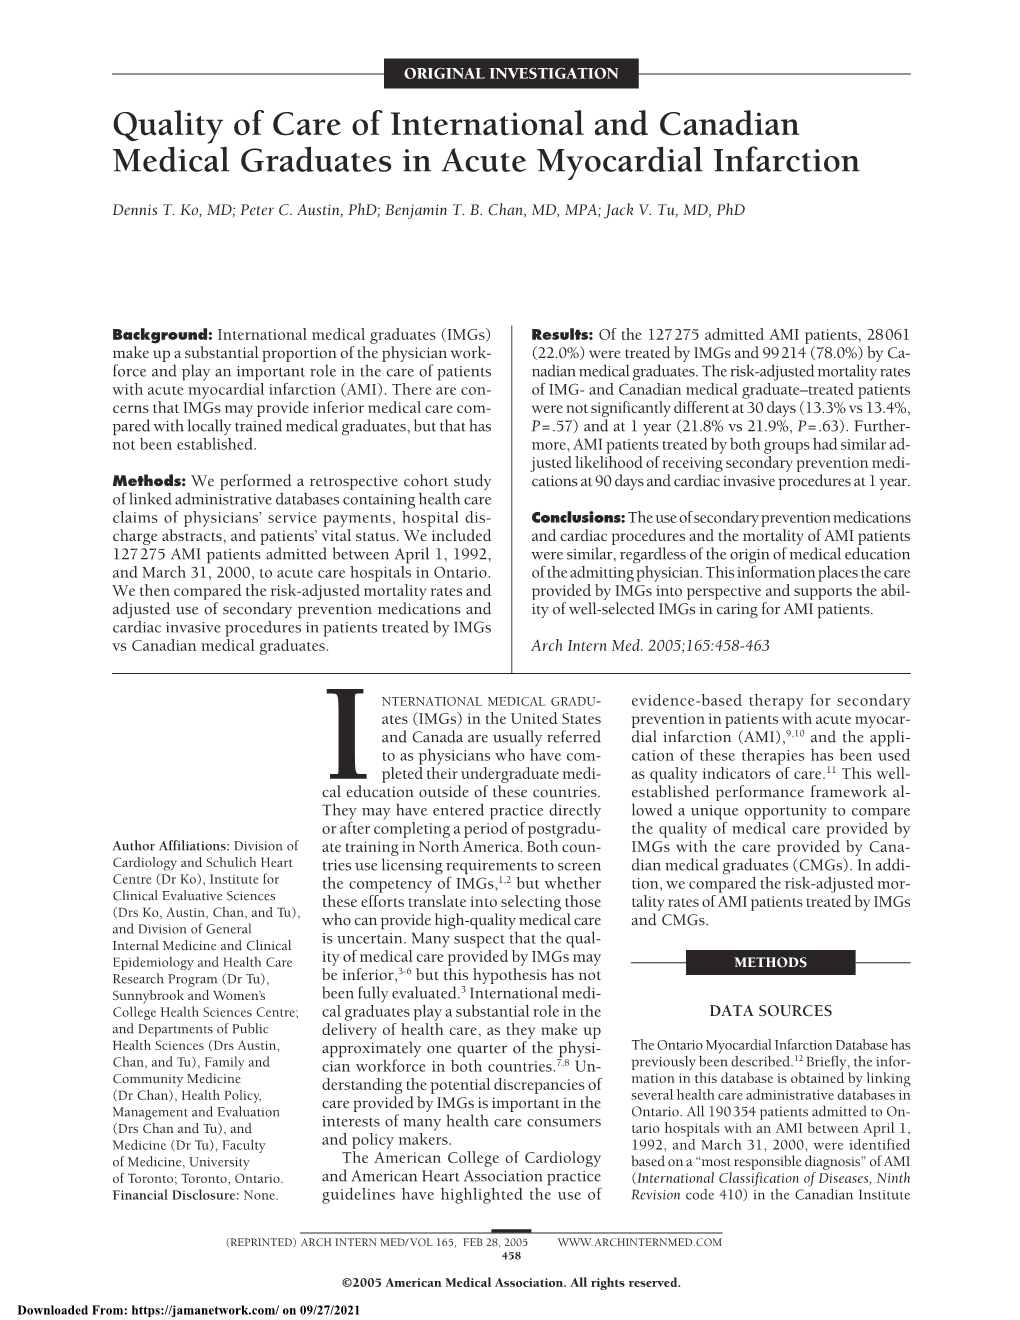 Quality of Care of International and Canadian Medical Graduates in Acute Myocardial Infarction